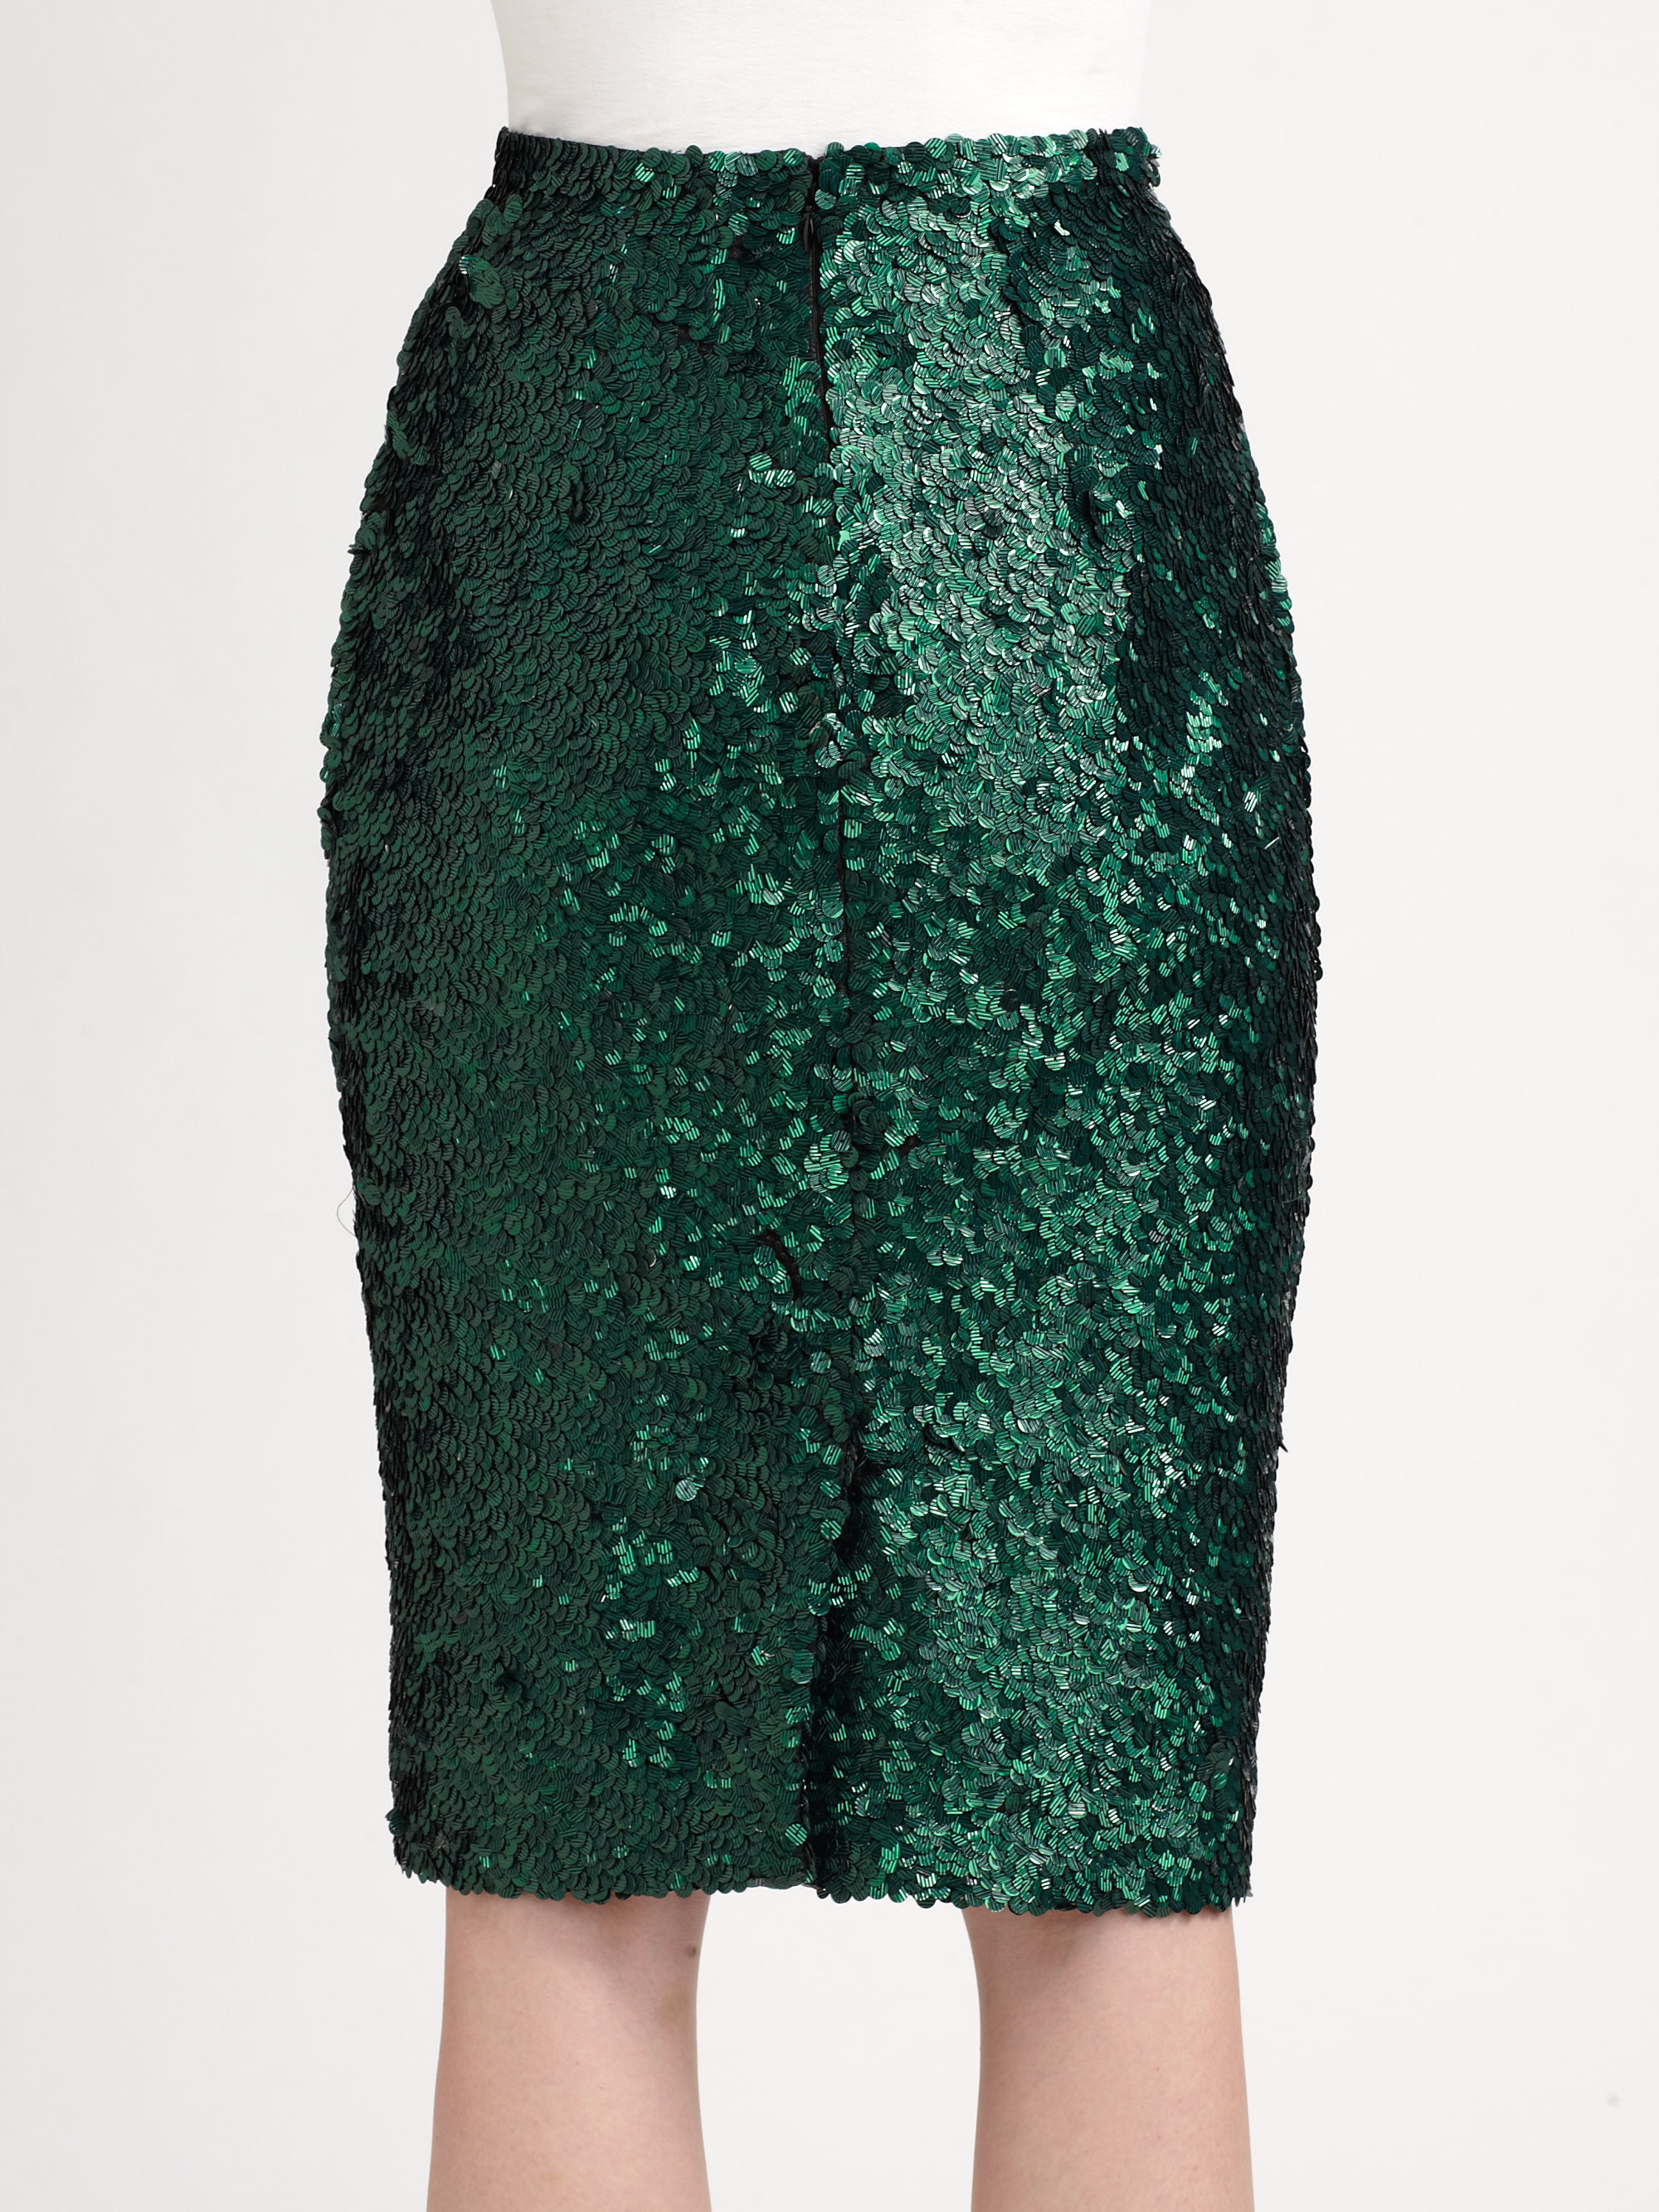 Burberry prorsum Sequined Skirt in Green | Lyst